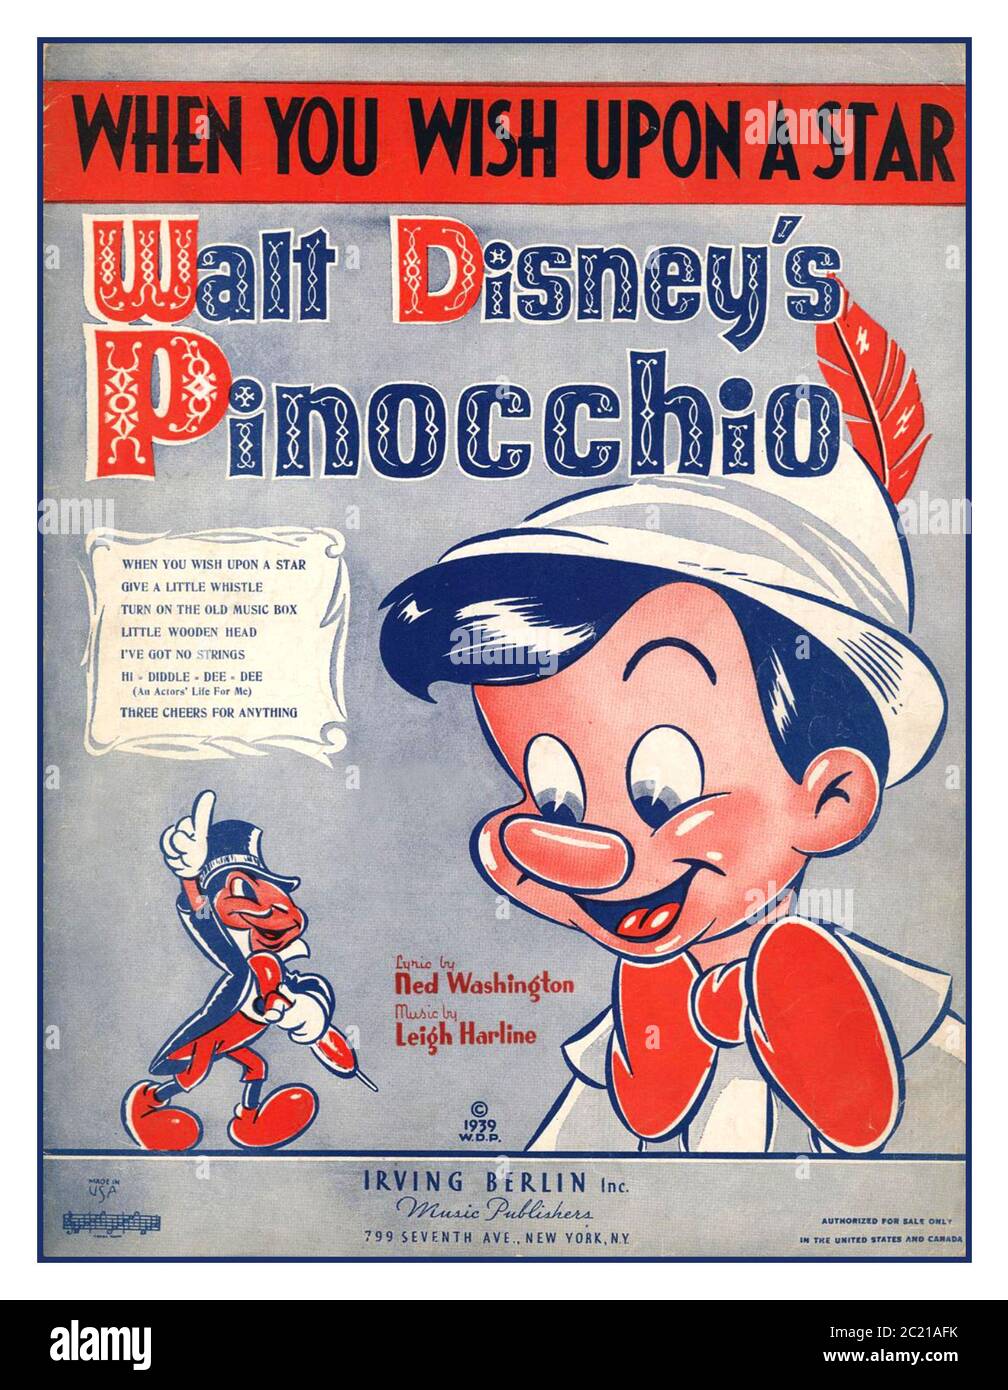 Disney Keychain - Character Alphabet - P Is for Pinocchio